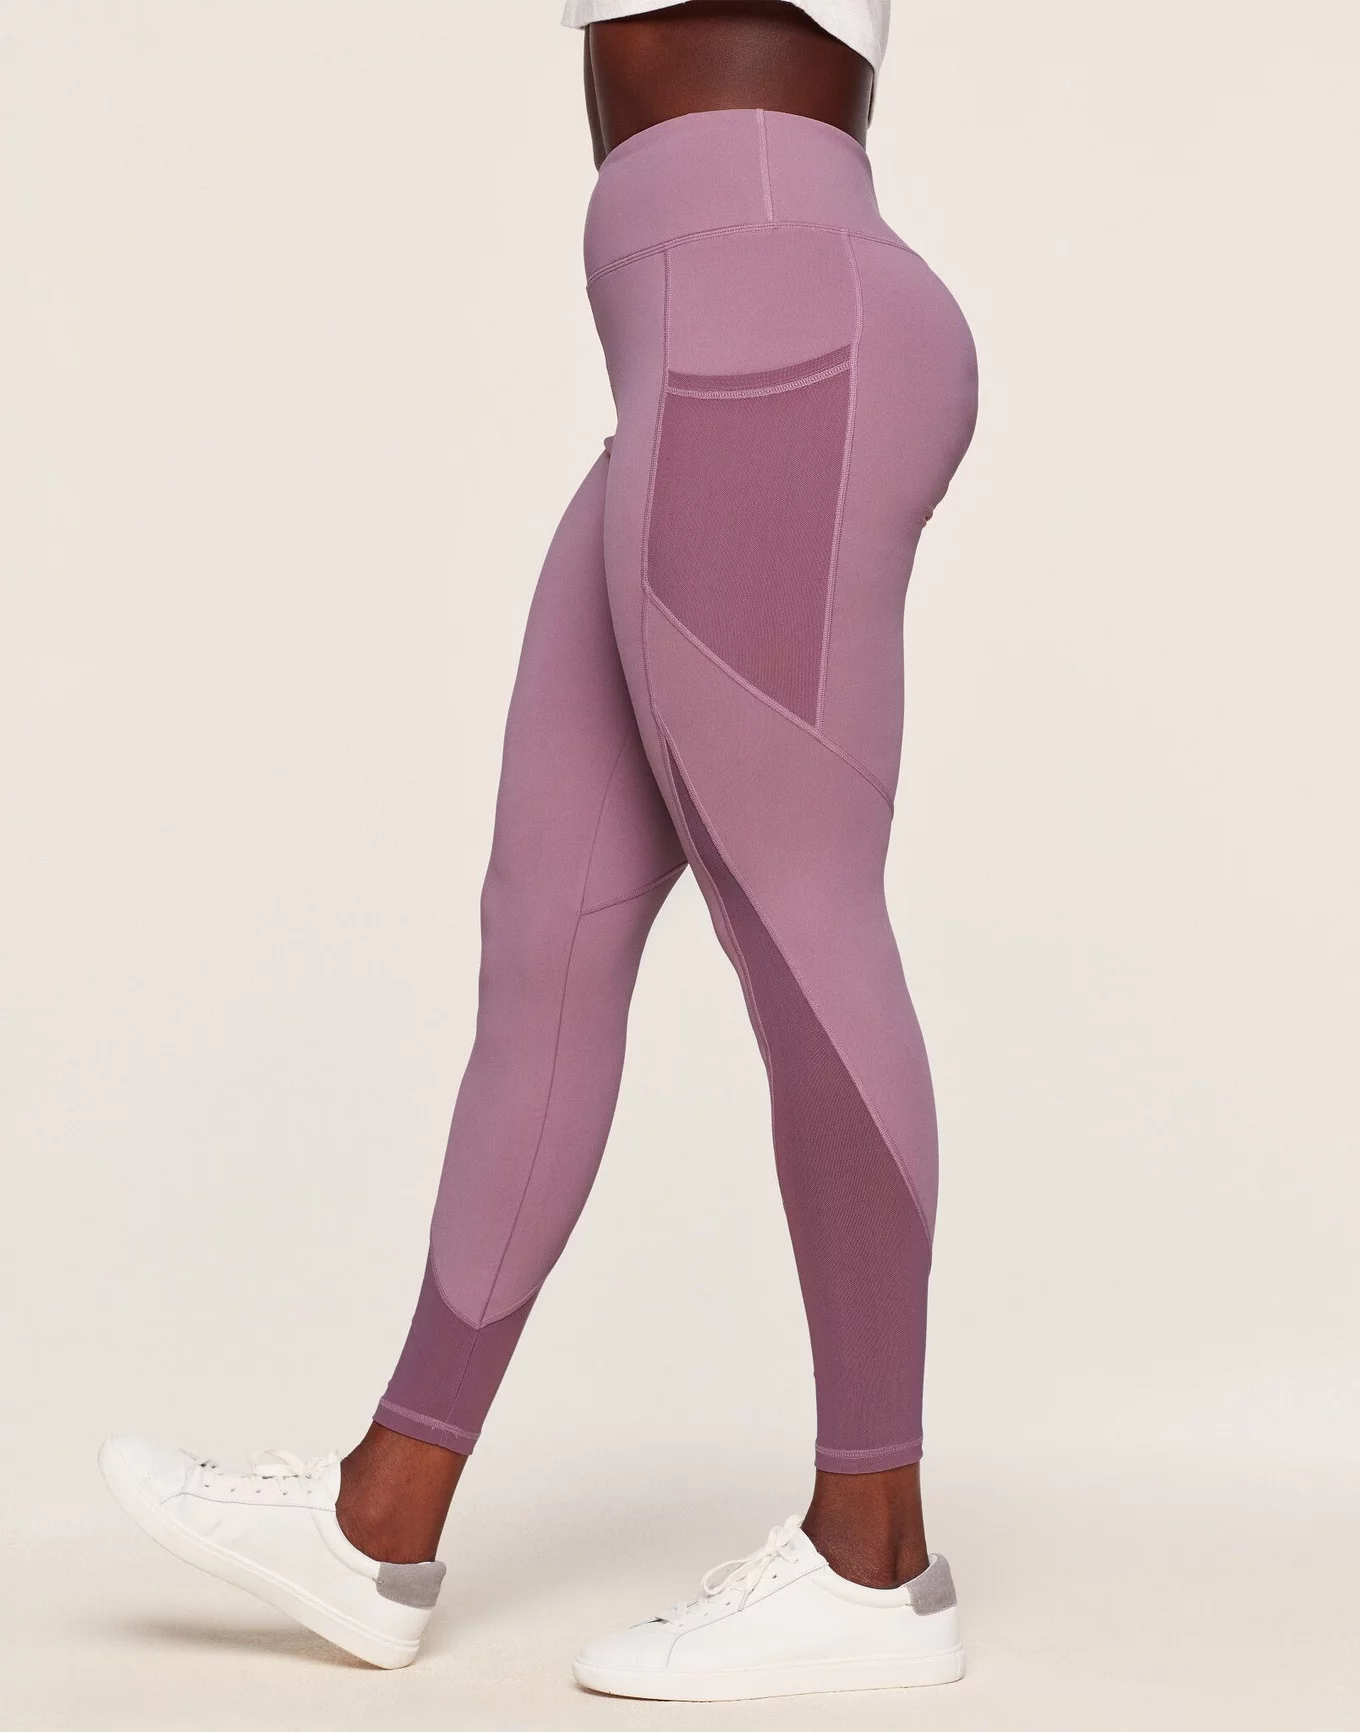 Take A Risk Leggings  Ava Lane Boutique - Women's clothing and accessories